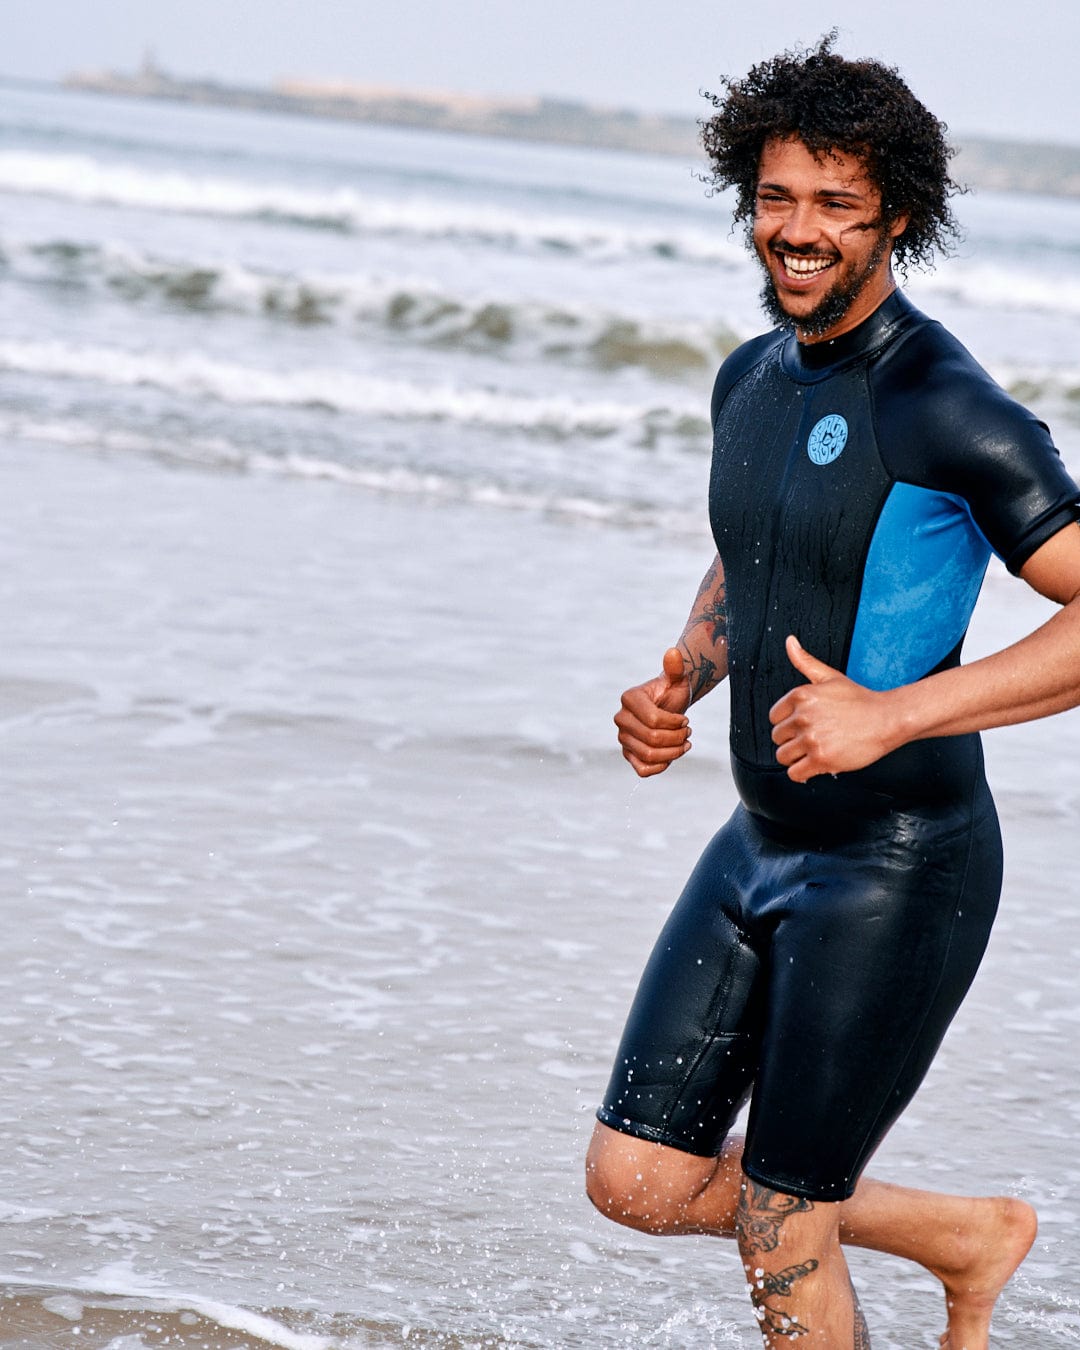 A joyful man in a Saltrock neoprene Core - Men's 3/2 Shortie Wetsuit - Black/blue running on the beach, with waves in the background. He has curly hair and tattoos on his arm.